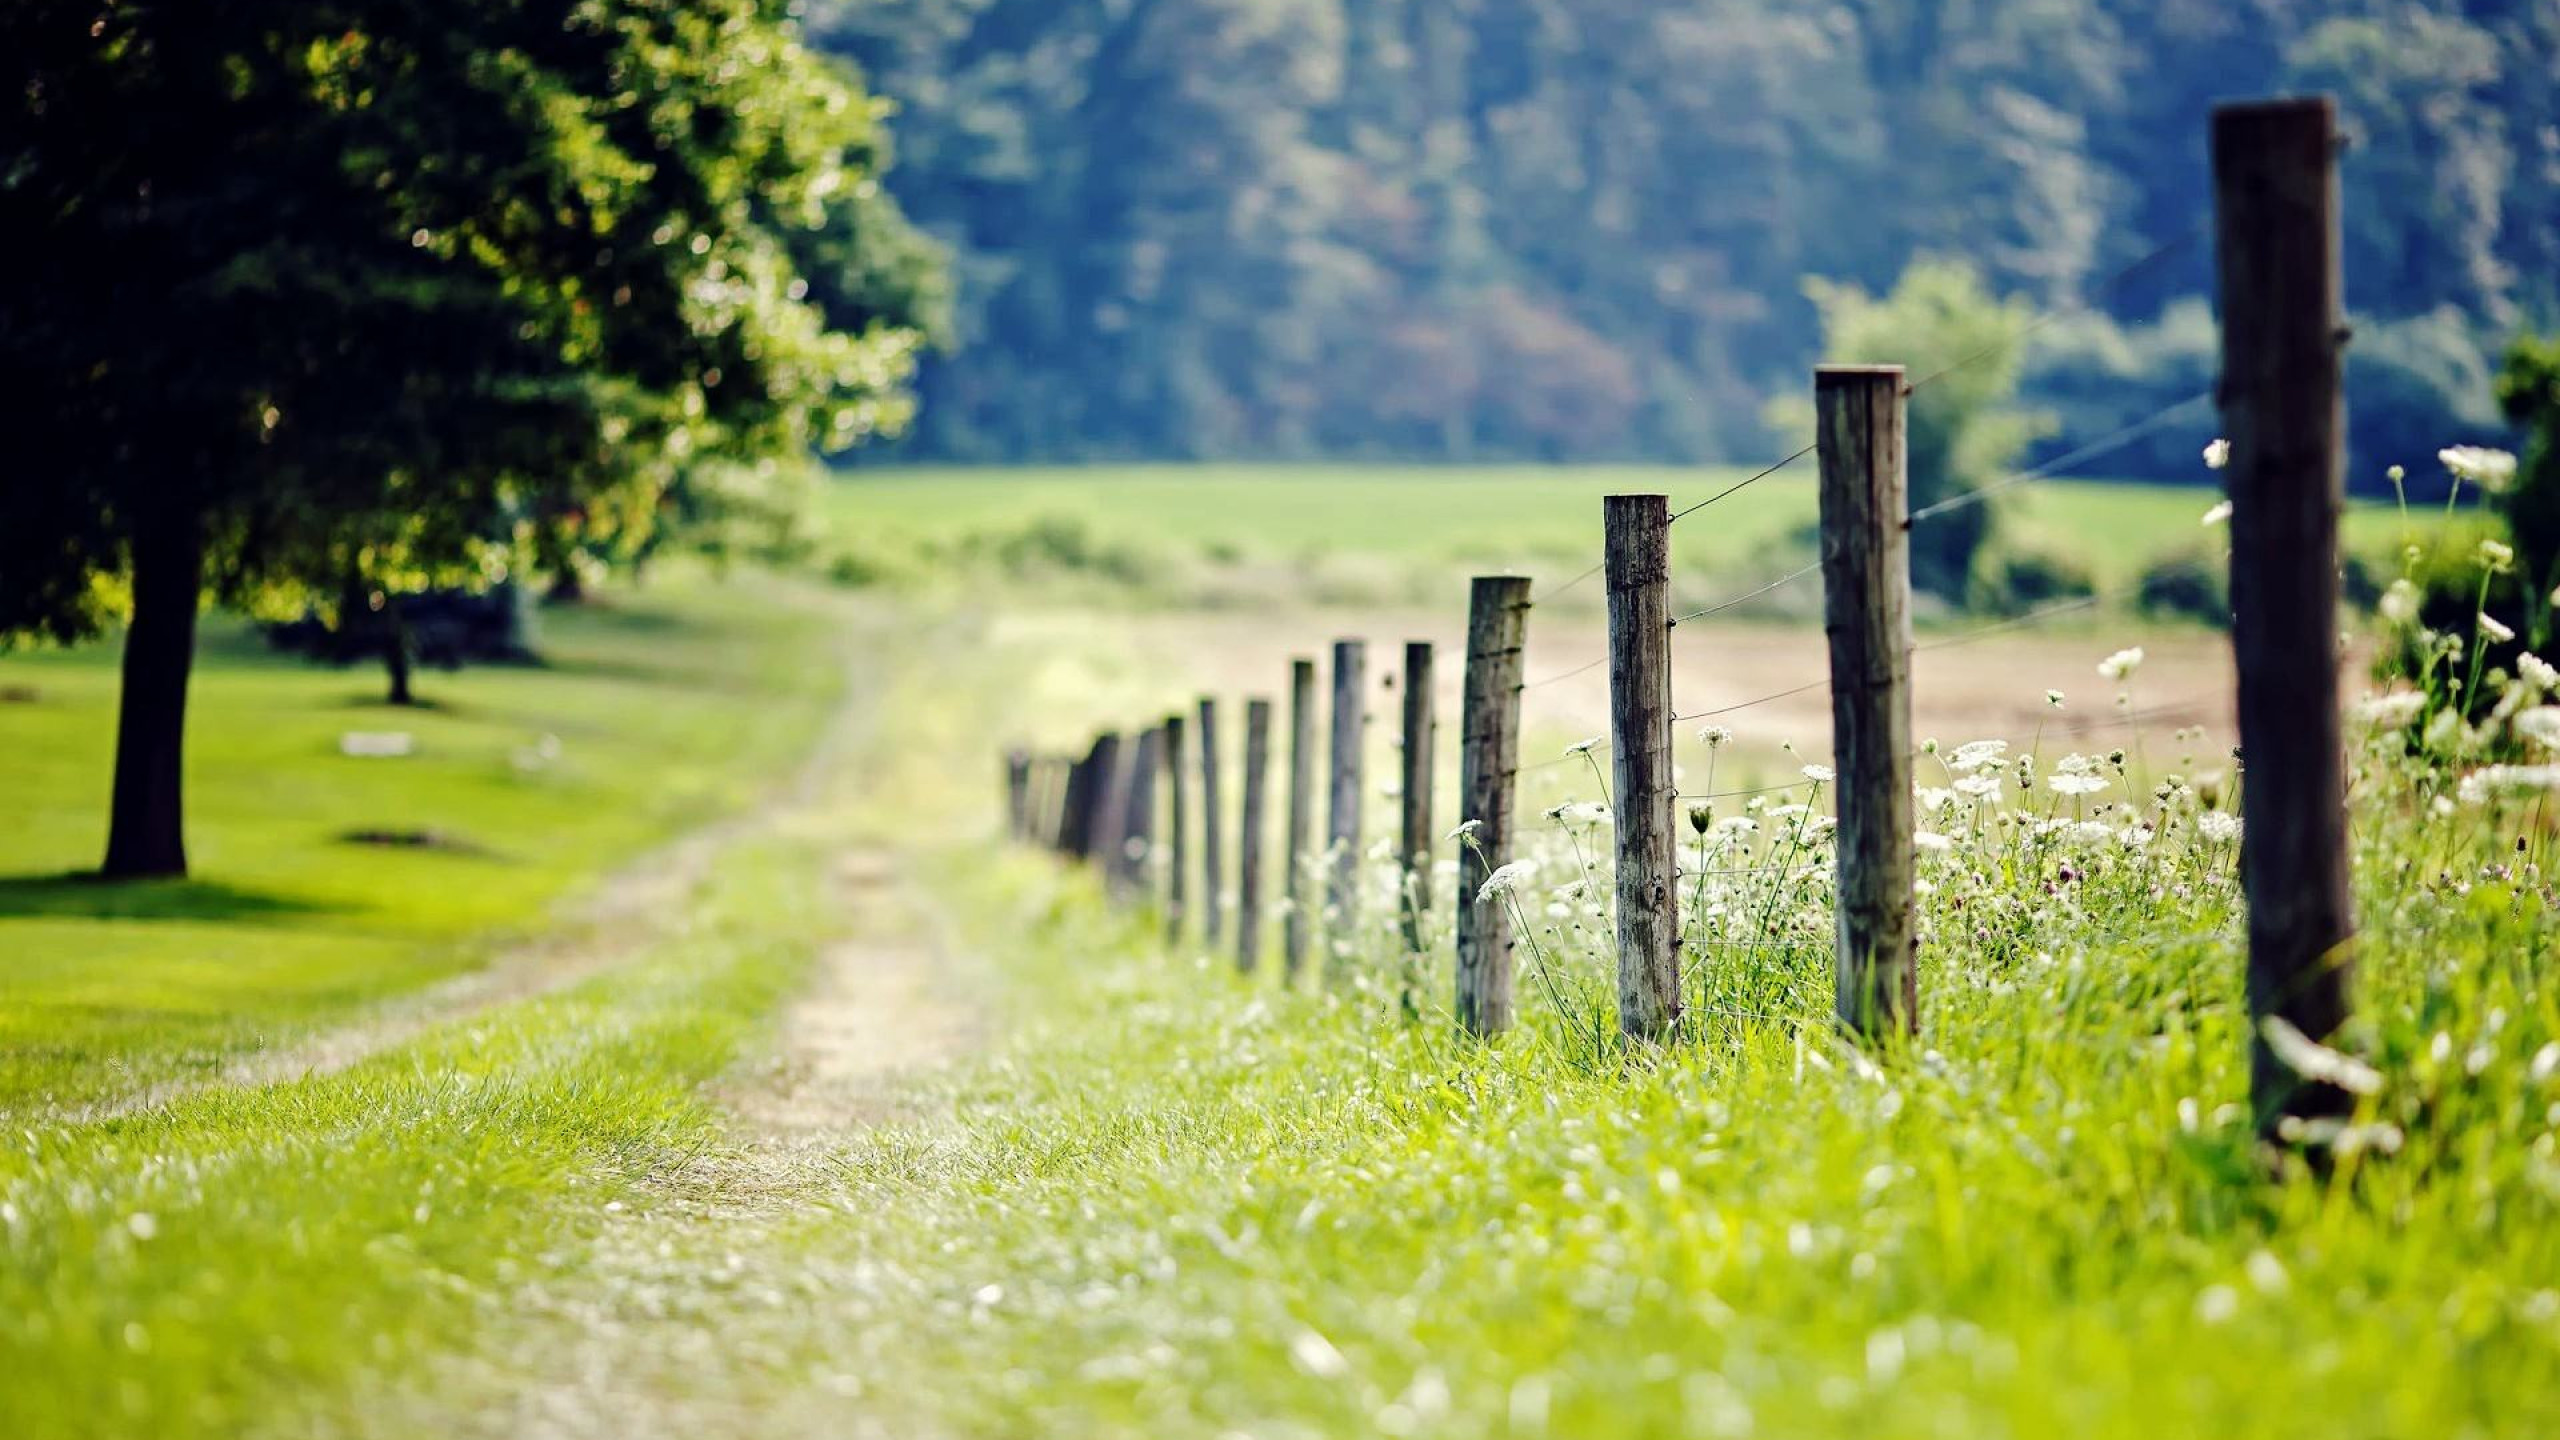 Brown Wooden Fence on Green Grass Field During Daytime. Wallpaper in 2560x1440 Resolution